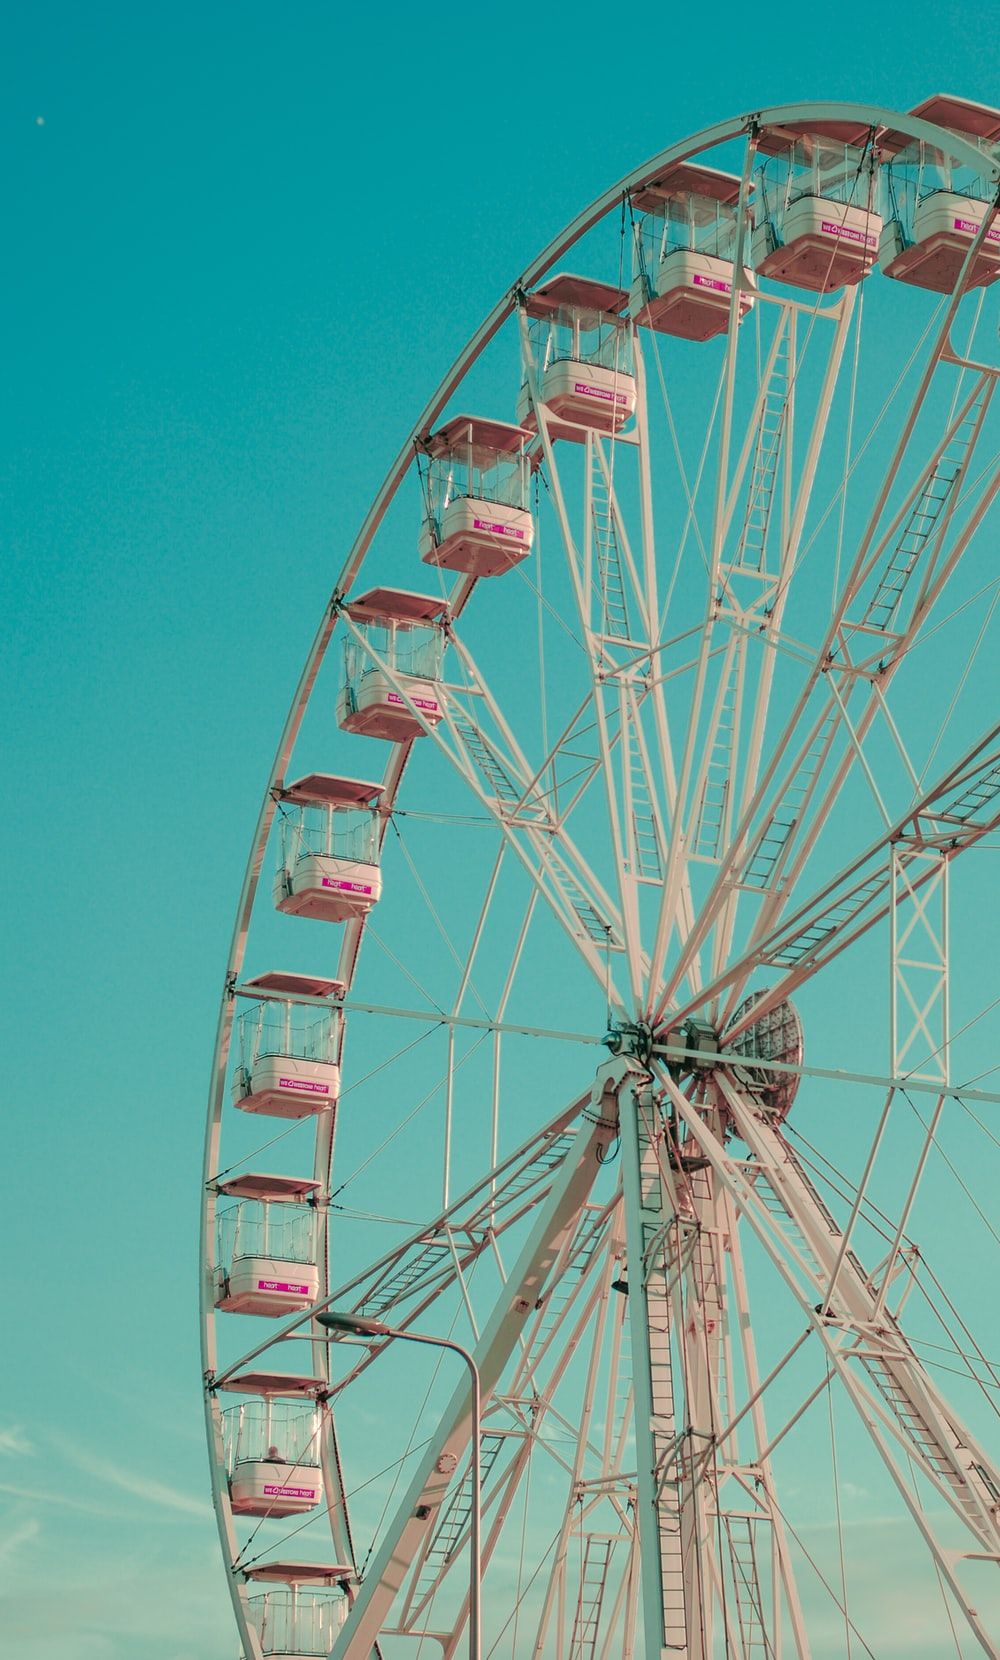 photo of red and white Ferris wheel during daytime photo